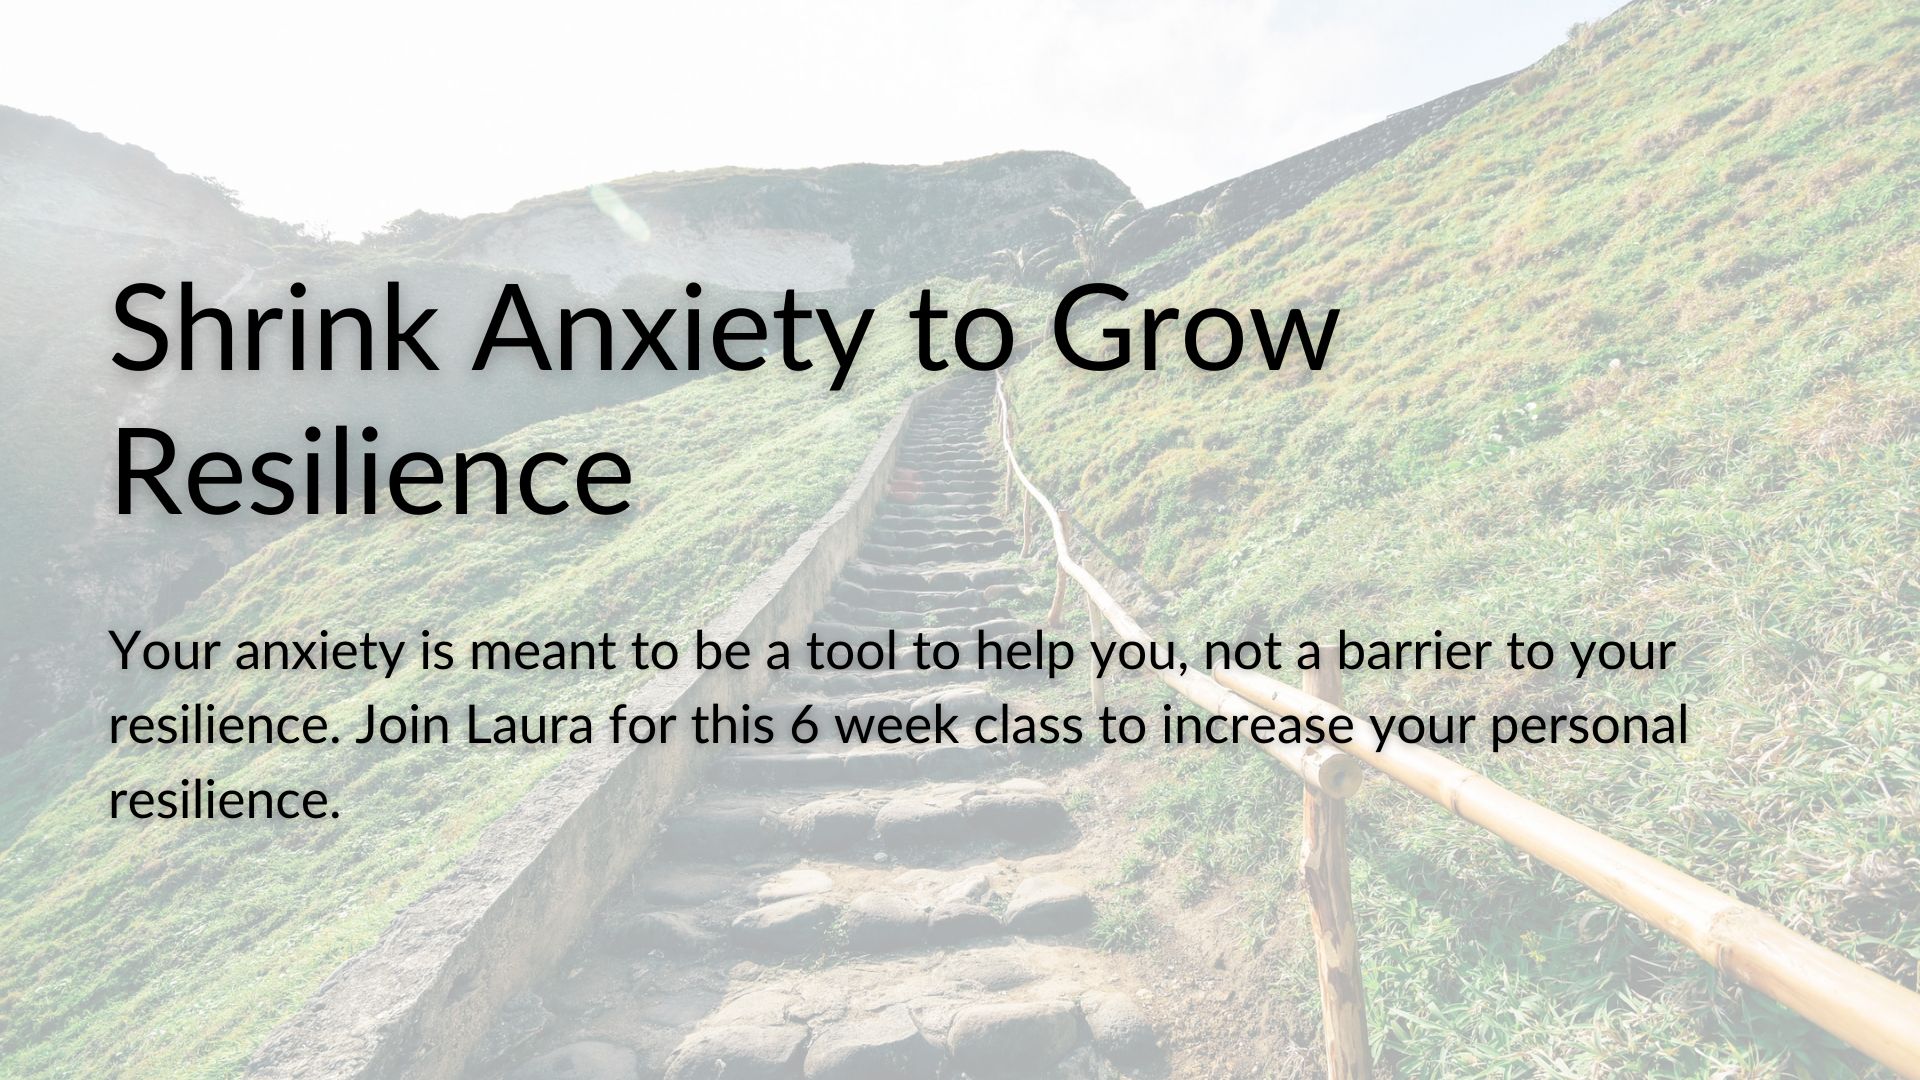 Advertisement for course, "Shrinking Aniety to Grow Resilience."